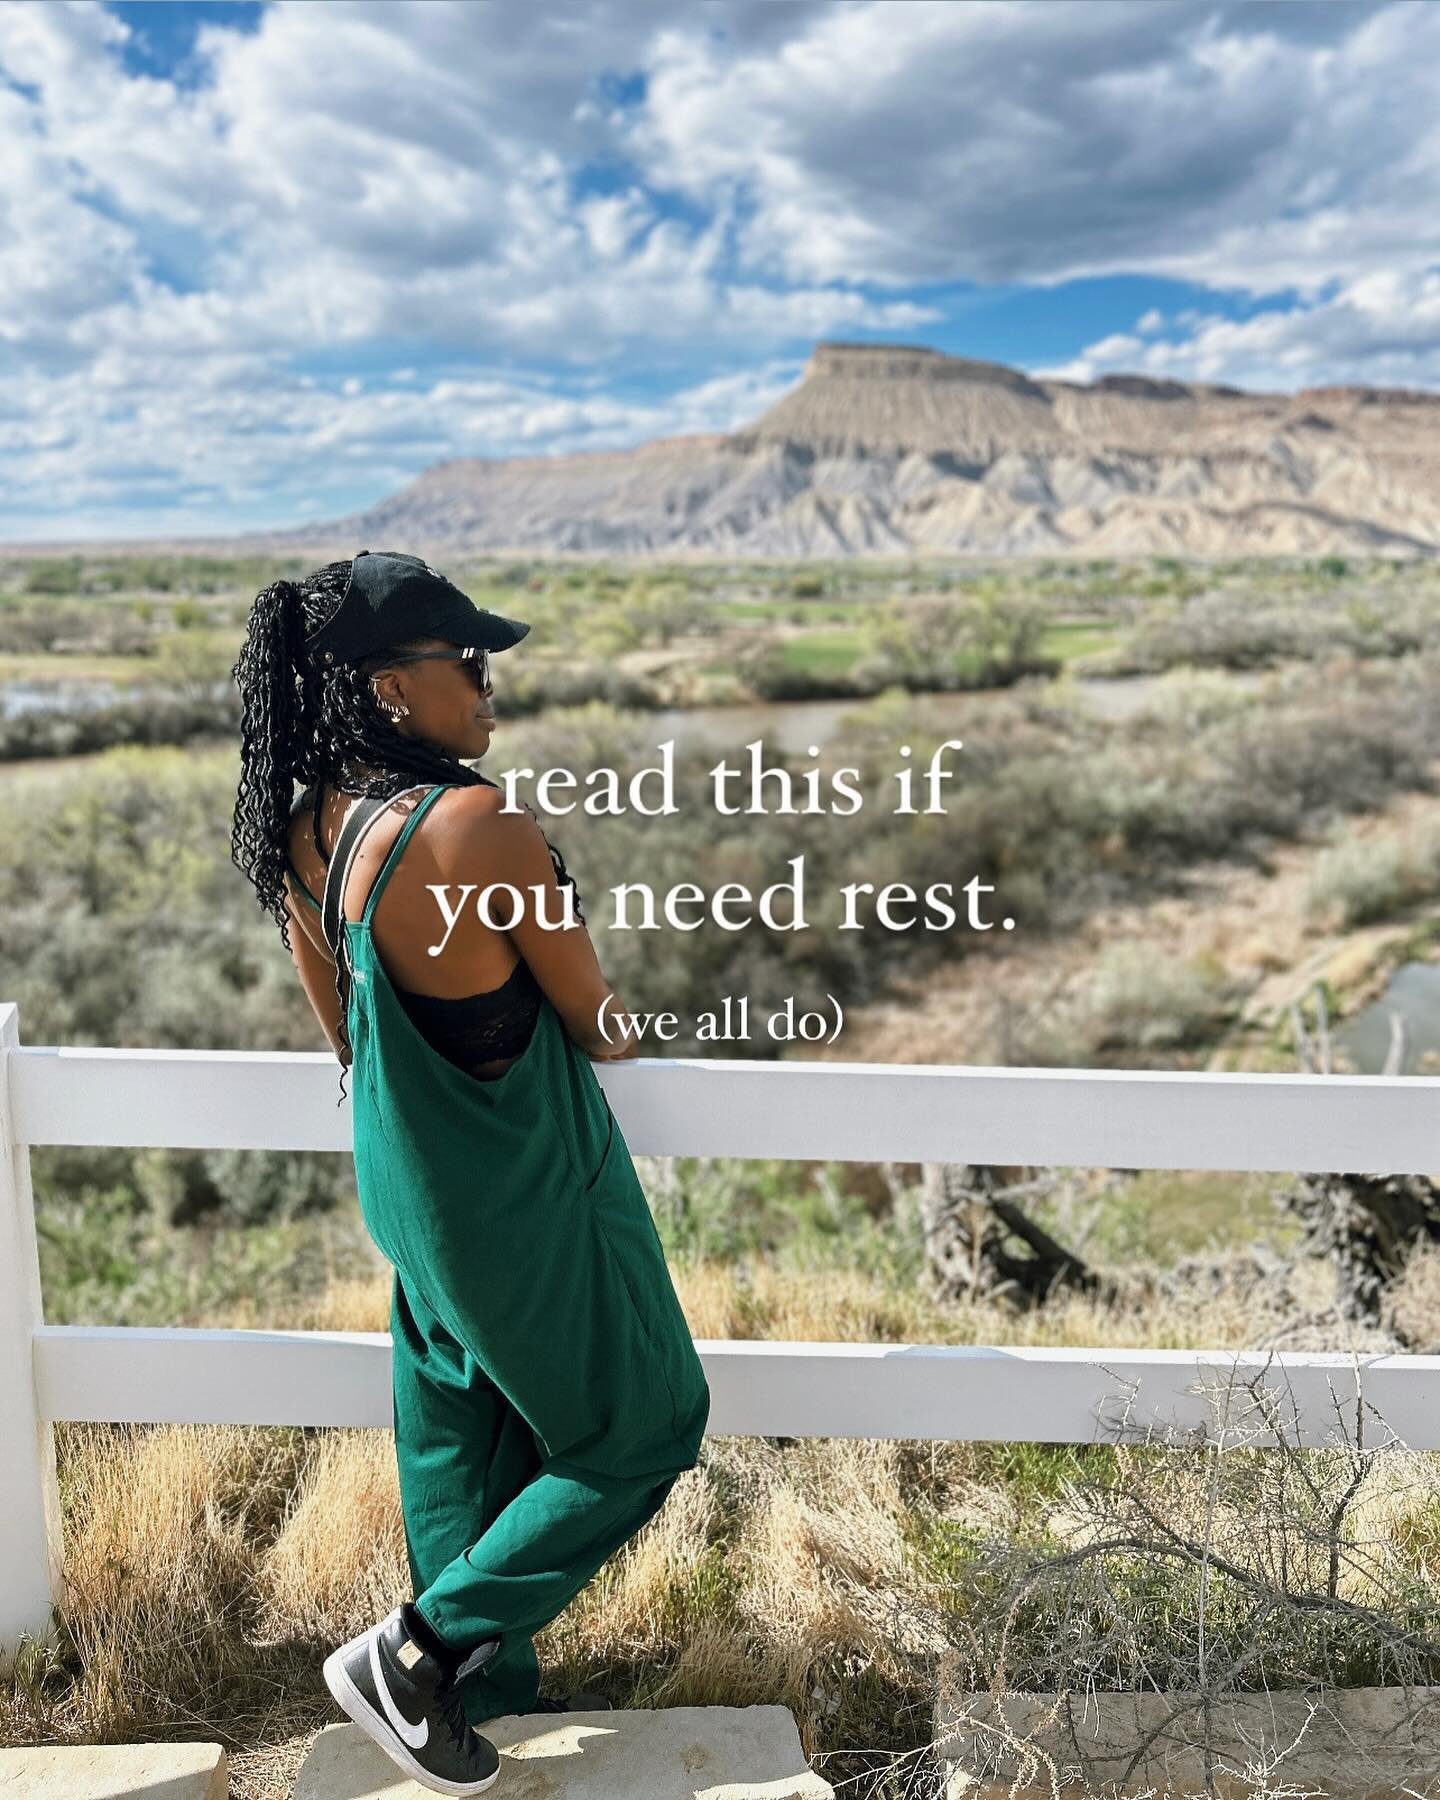 come join me while i getaway with my husband chad in palisade, colorado.

🛟 save this for the encouraging rest reminder + so you have a location option for where to go get some rest 😌🫶🏾

🍷 did you know colorado has a wine country spot? (check th